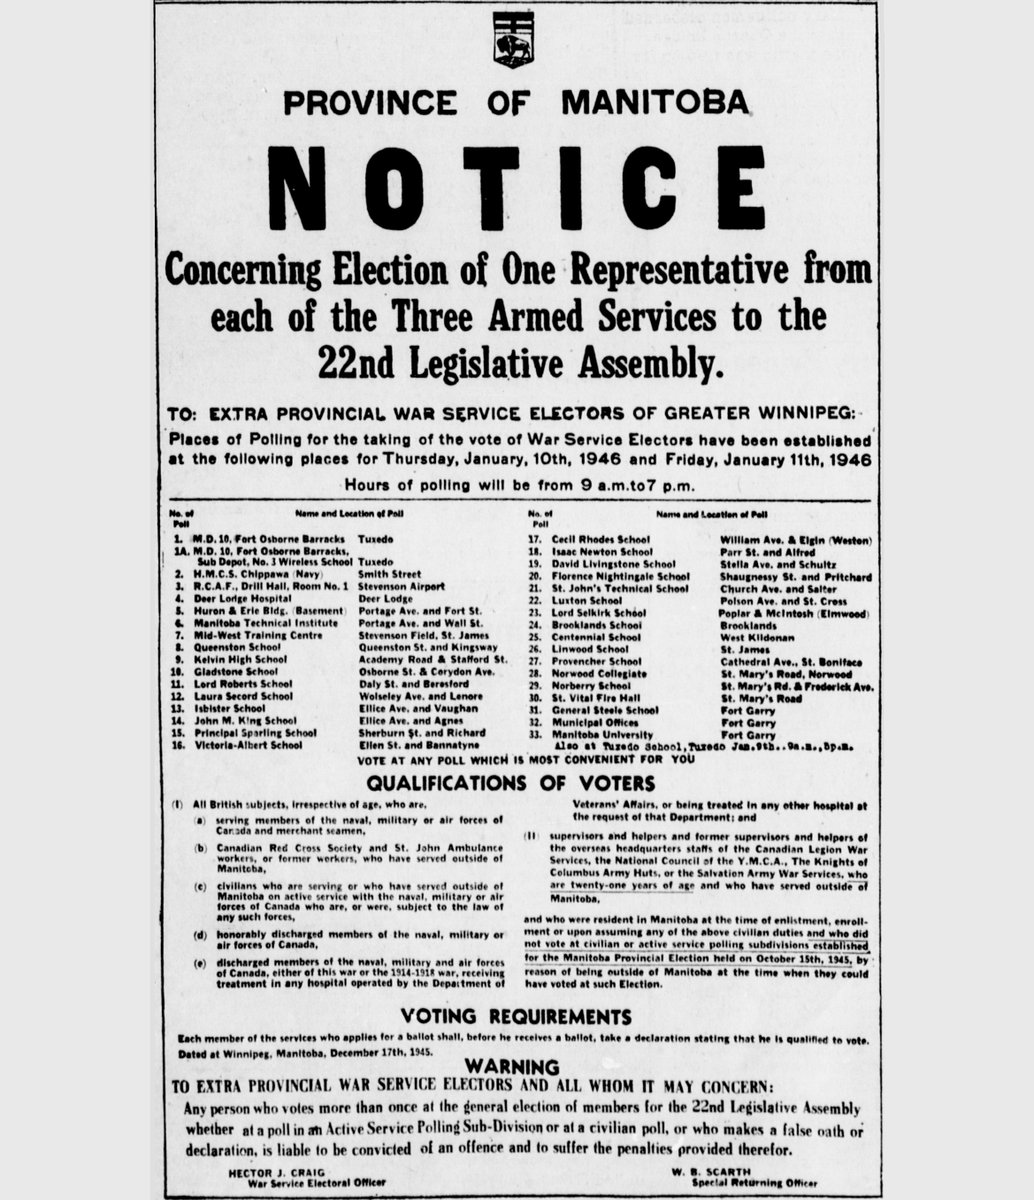 There were 24 Members of the Legislative Assembly elected in 1870, one for each electoral division. That number was increased as the population of Manitoba grew, to 55 in 1920. In 1946, three seats were added to represent the three branches of the Armed Forces.